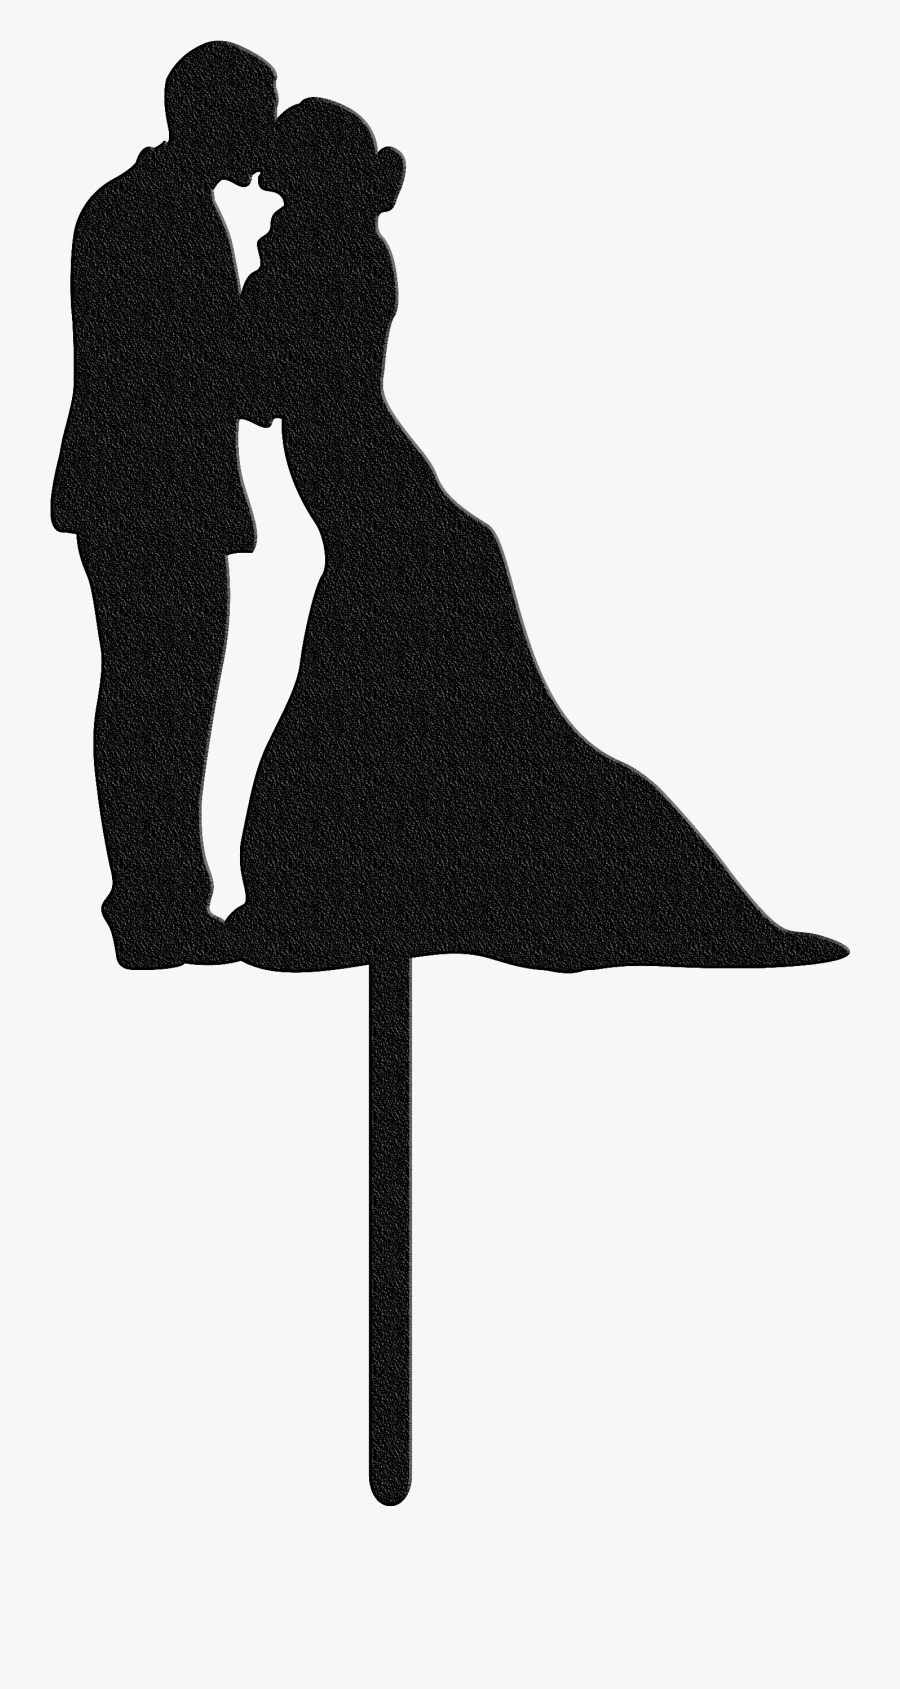 Bluewater Decor Wedding Couple Cake Topper Black - Couple Cake Images Topper, Transparent Clipart